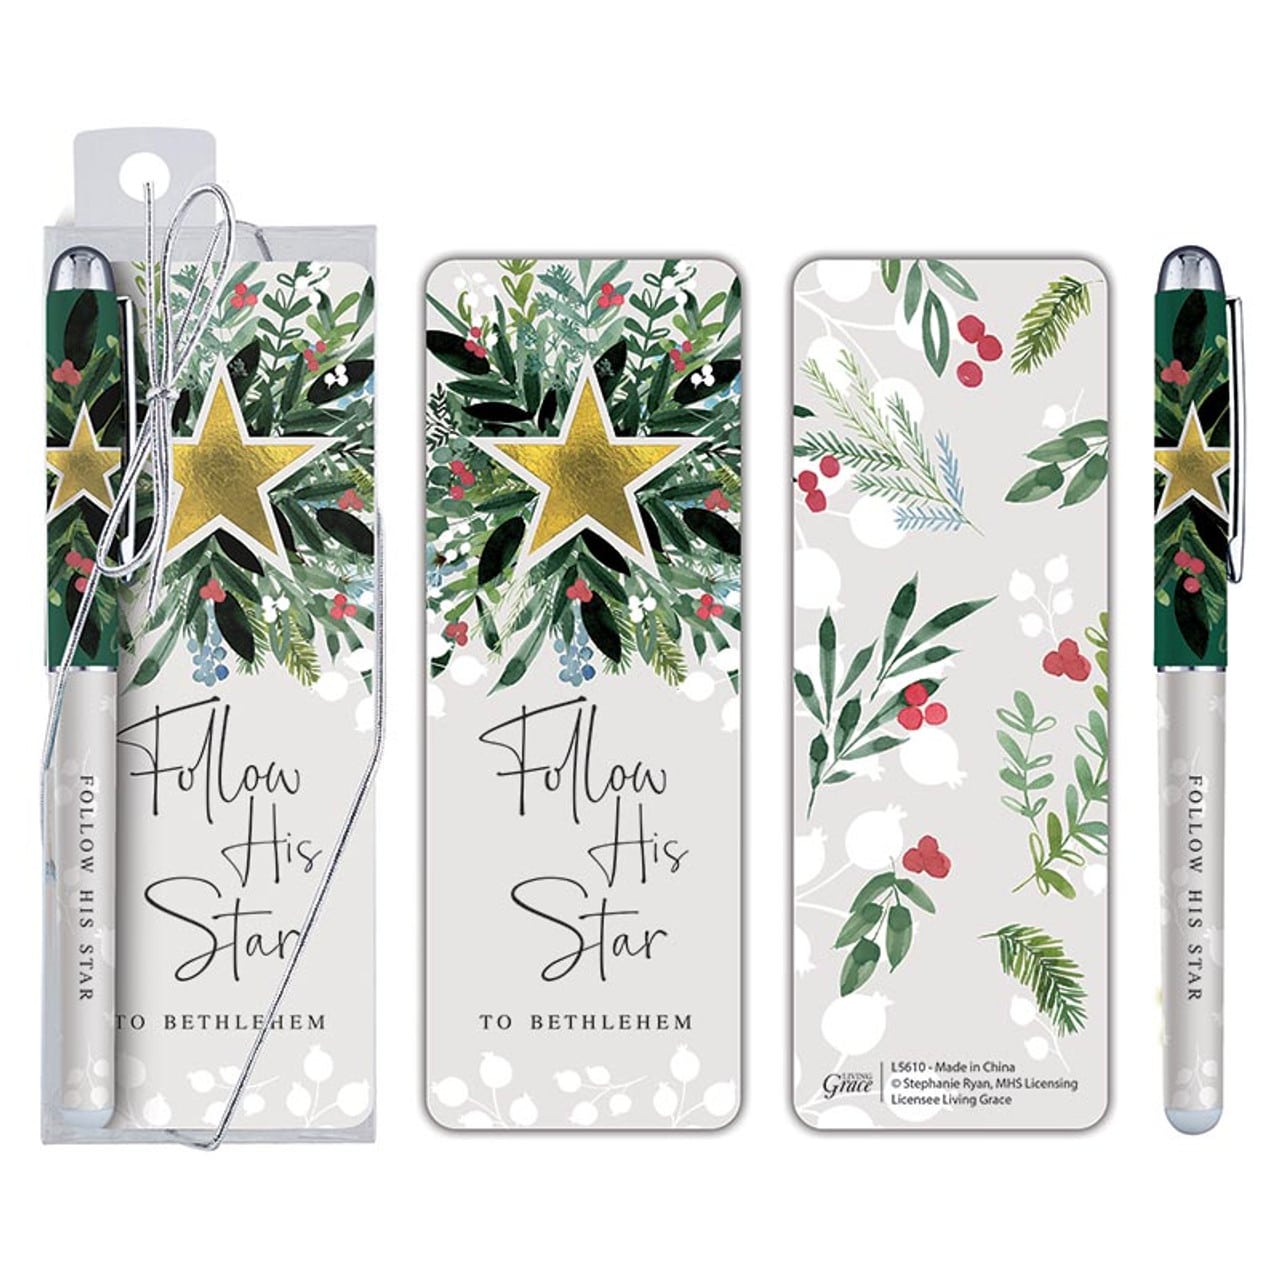 Follow His Star to Bethlehem Gift Pen with Bookmark